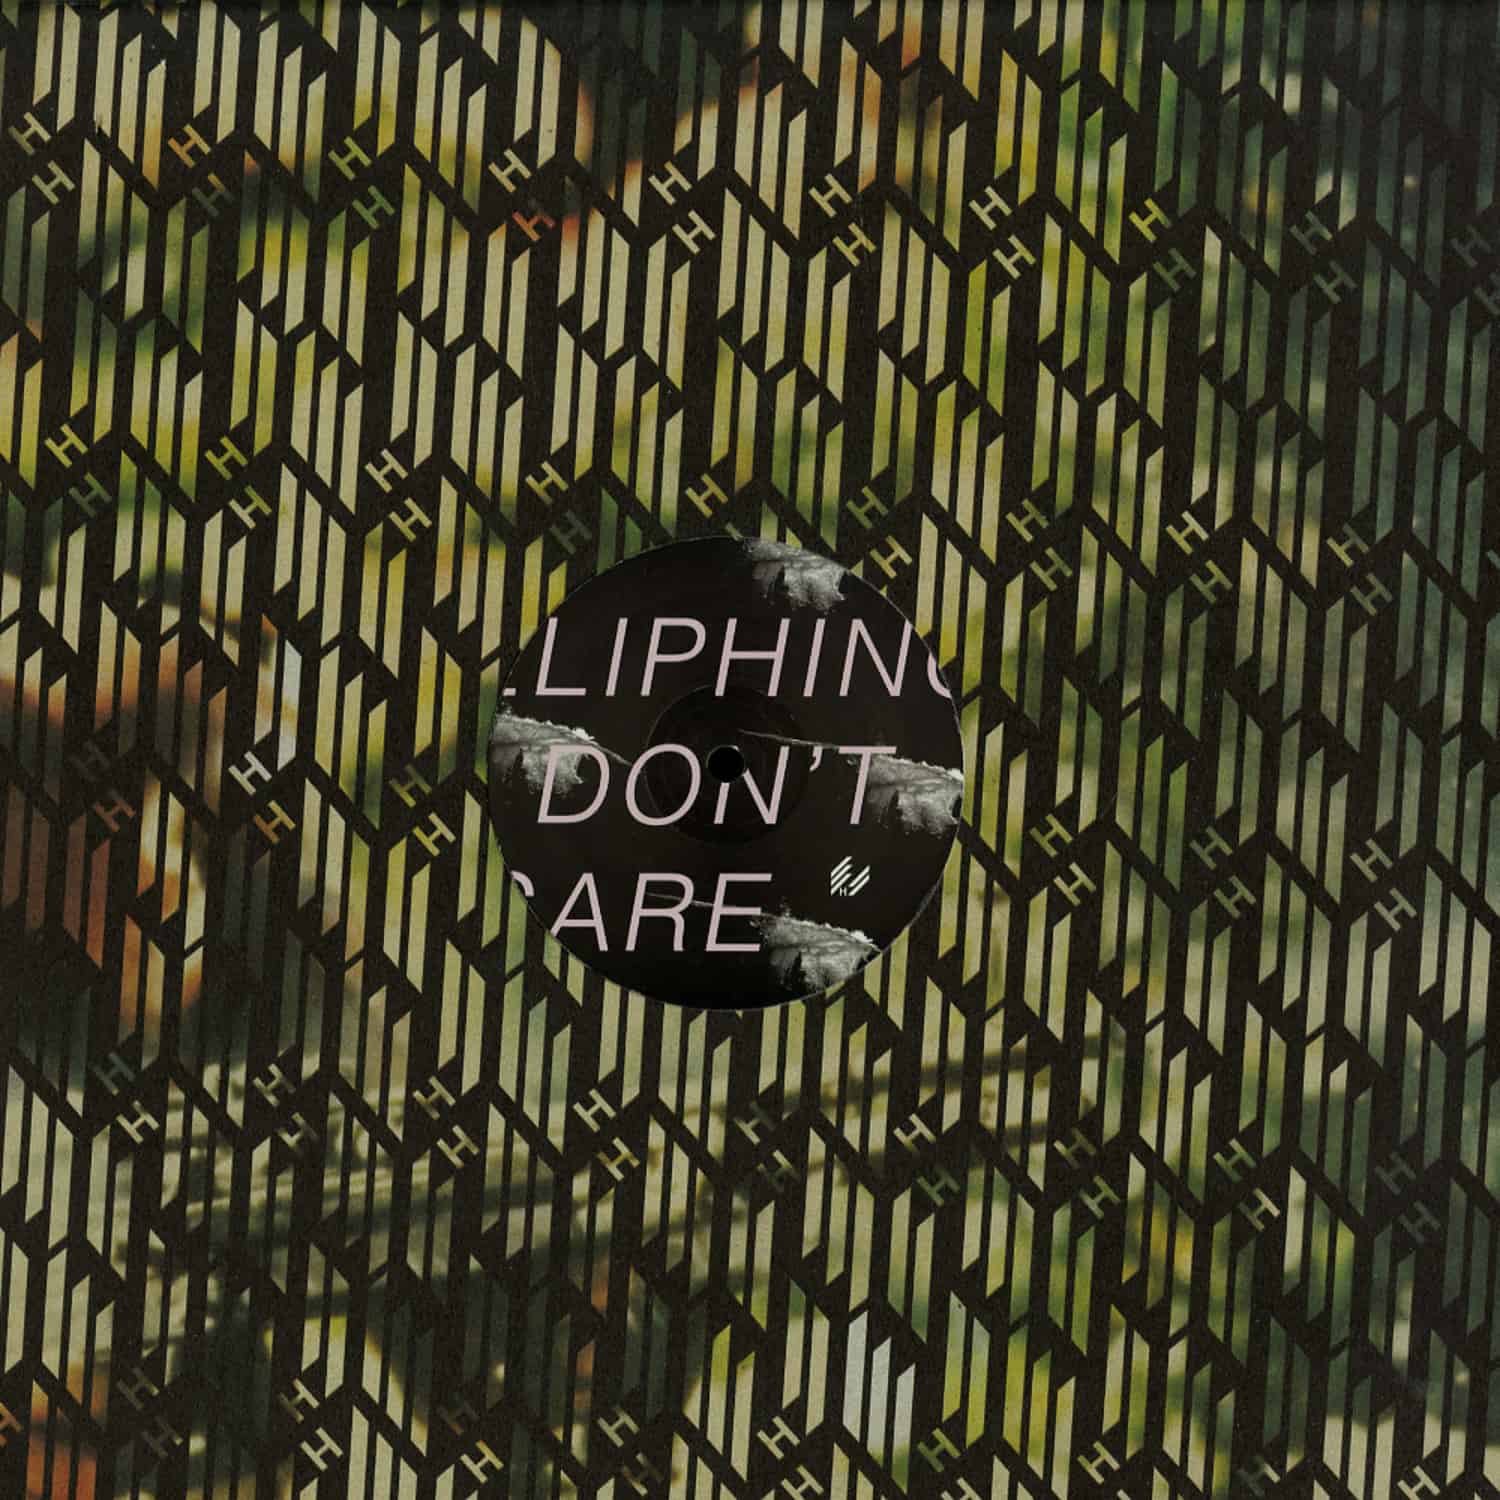 Eliphino - I DONT CARE